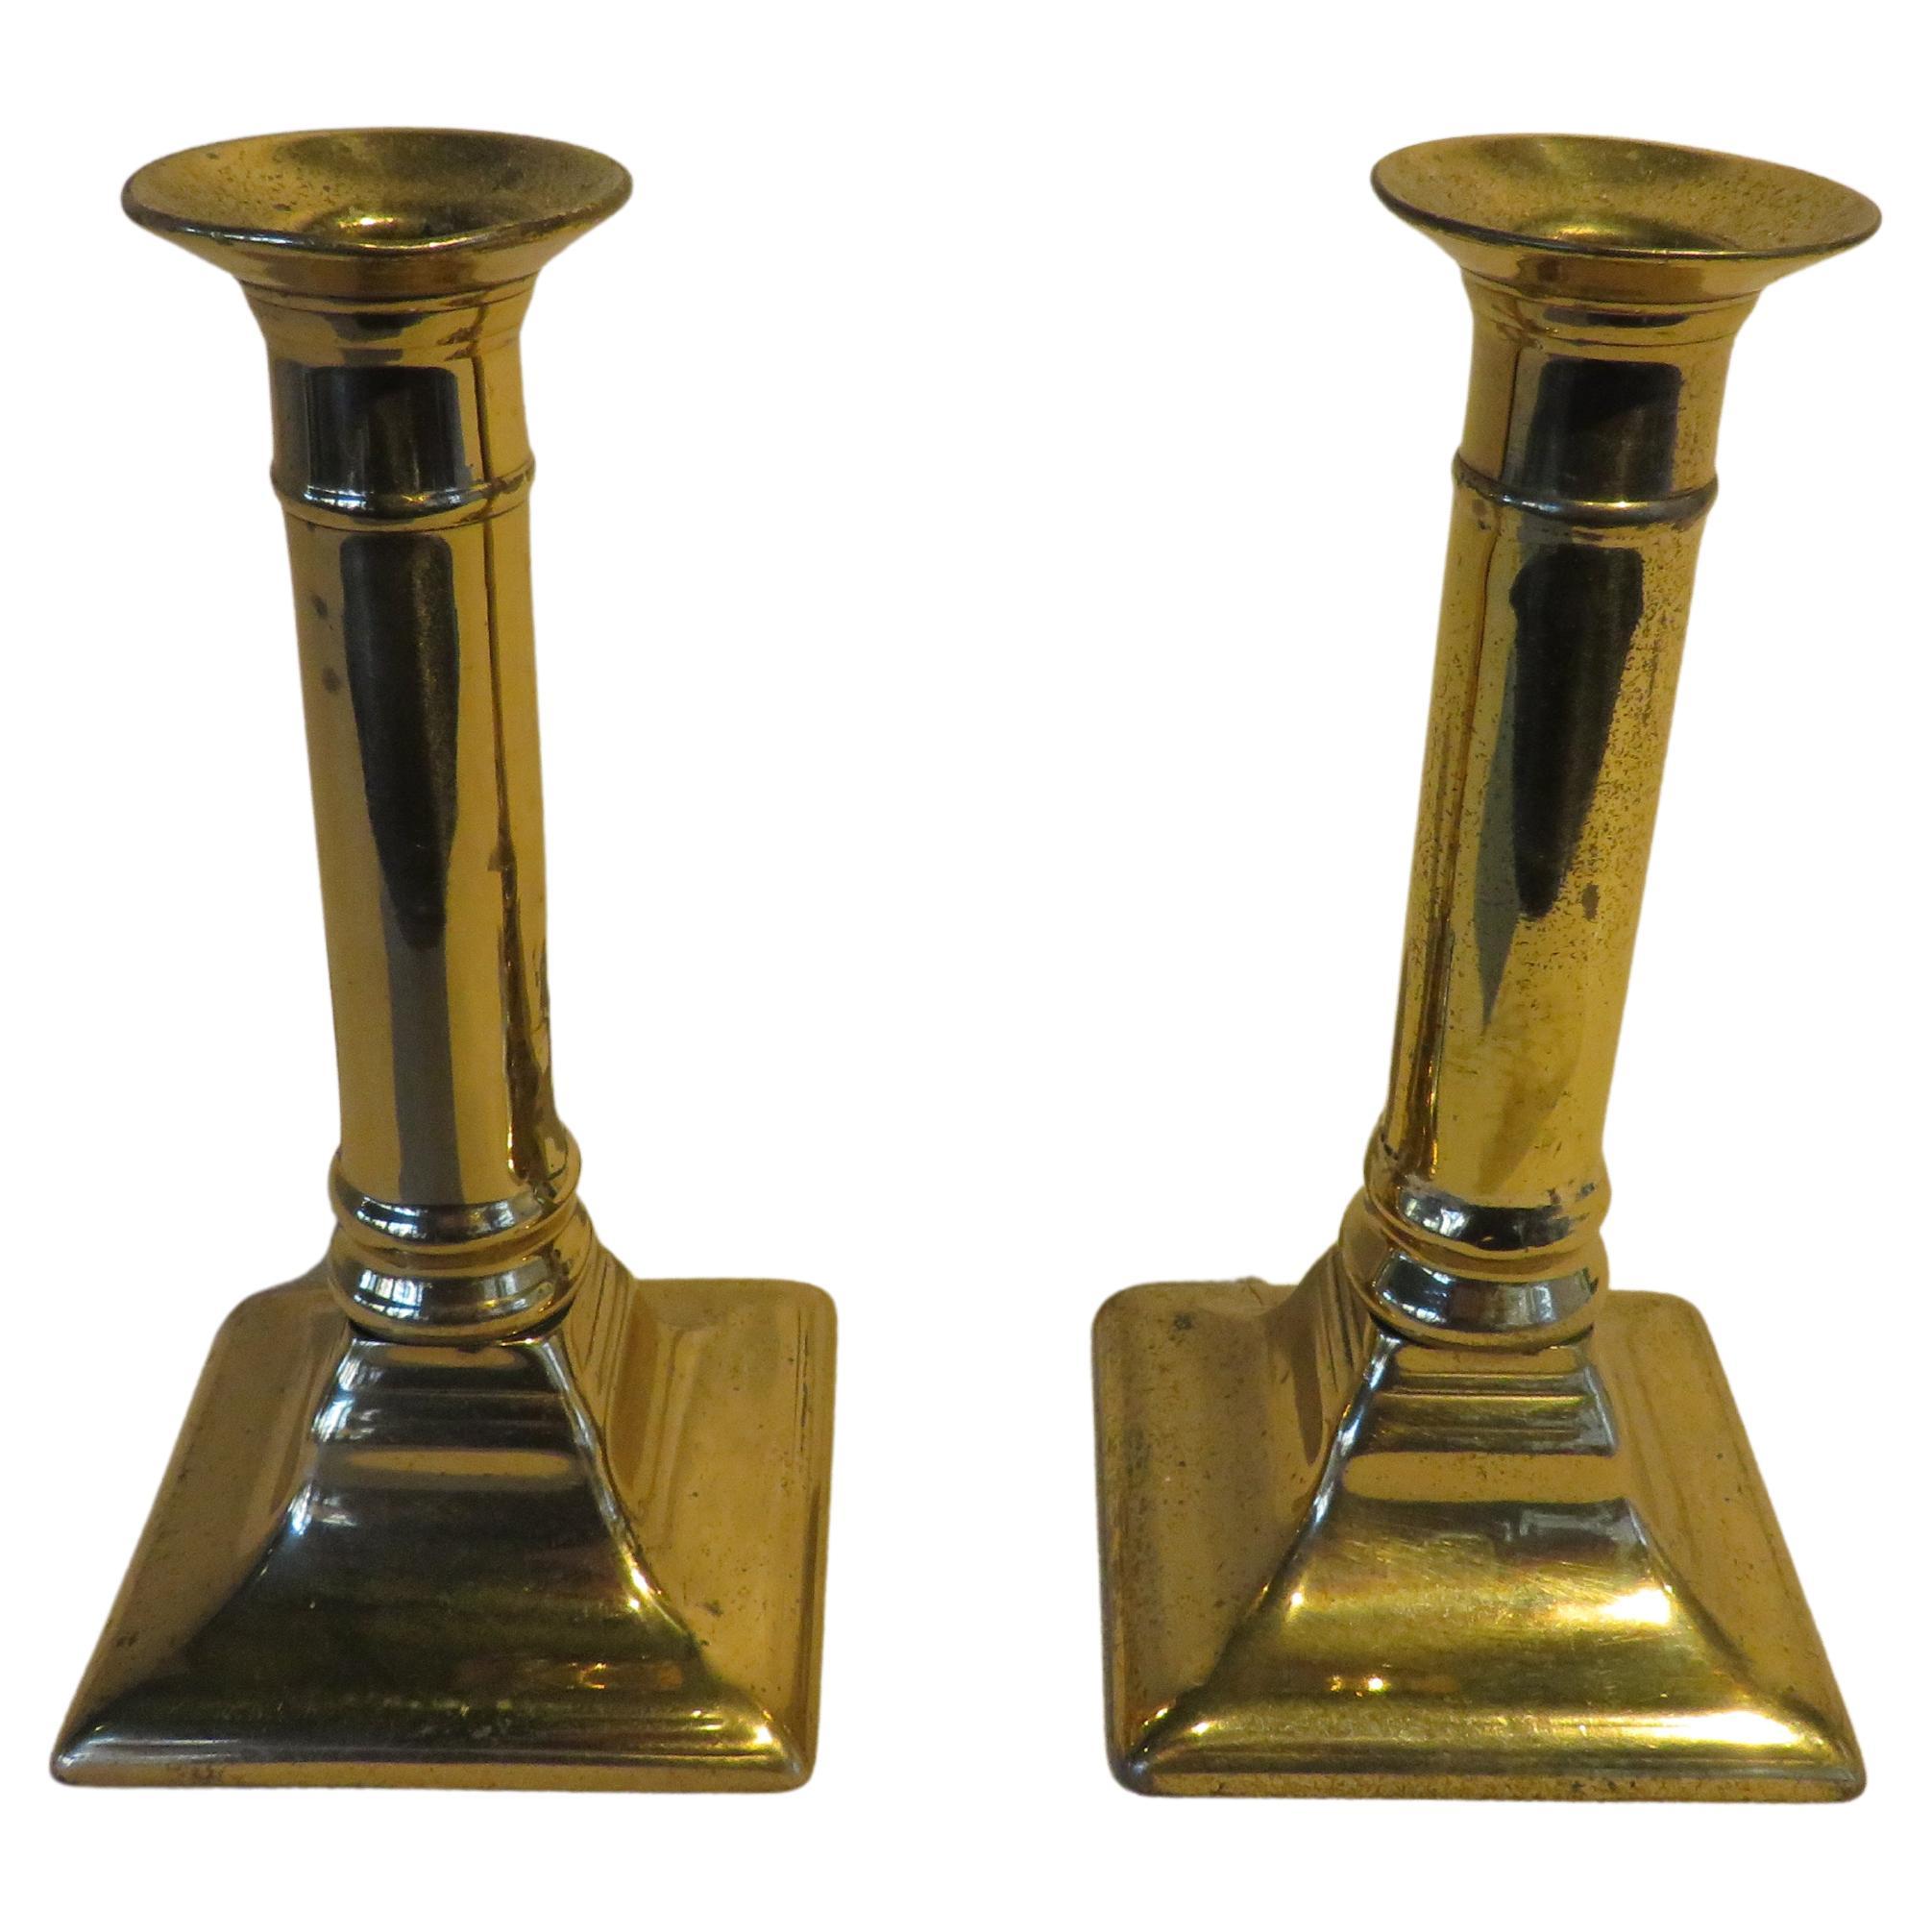 Pair of Antique English Federal Period Brass Push-Up Candlesticks